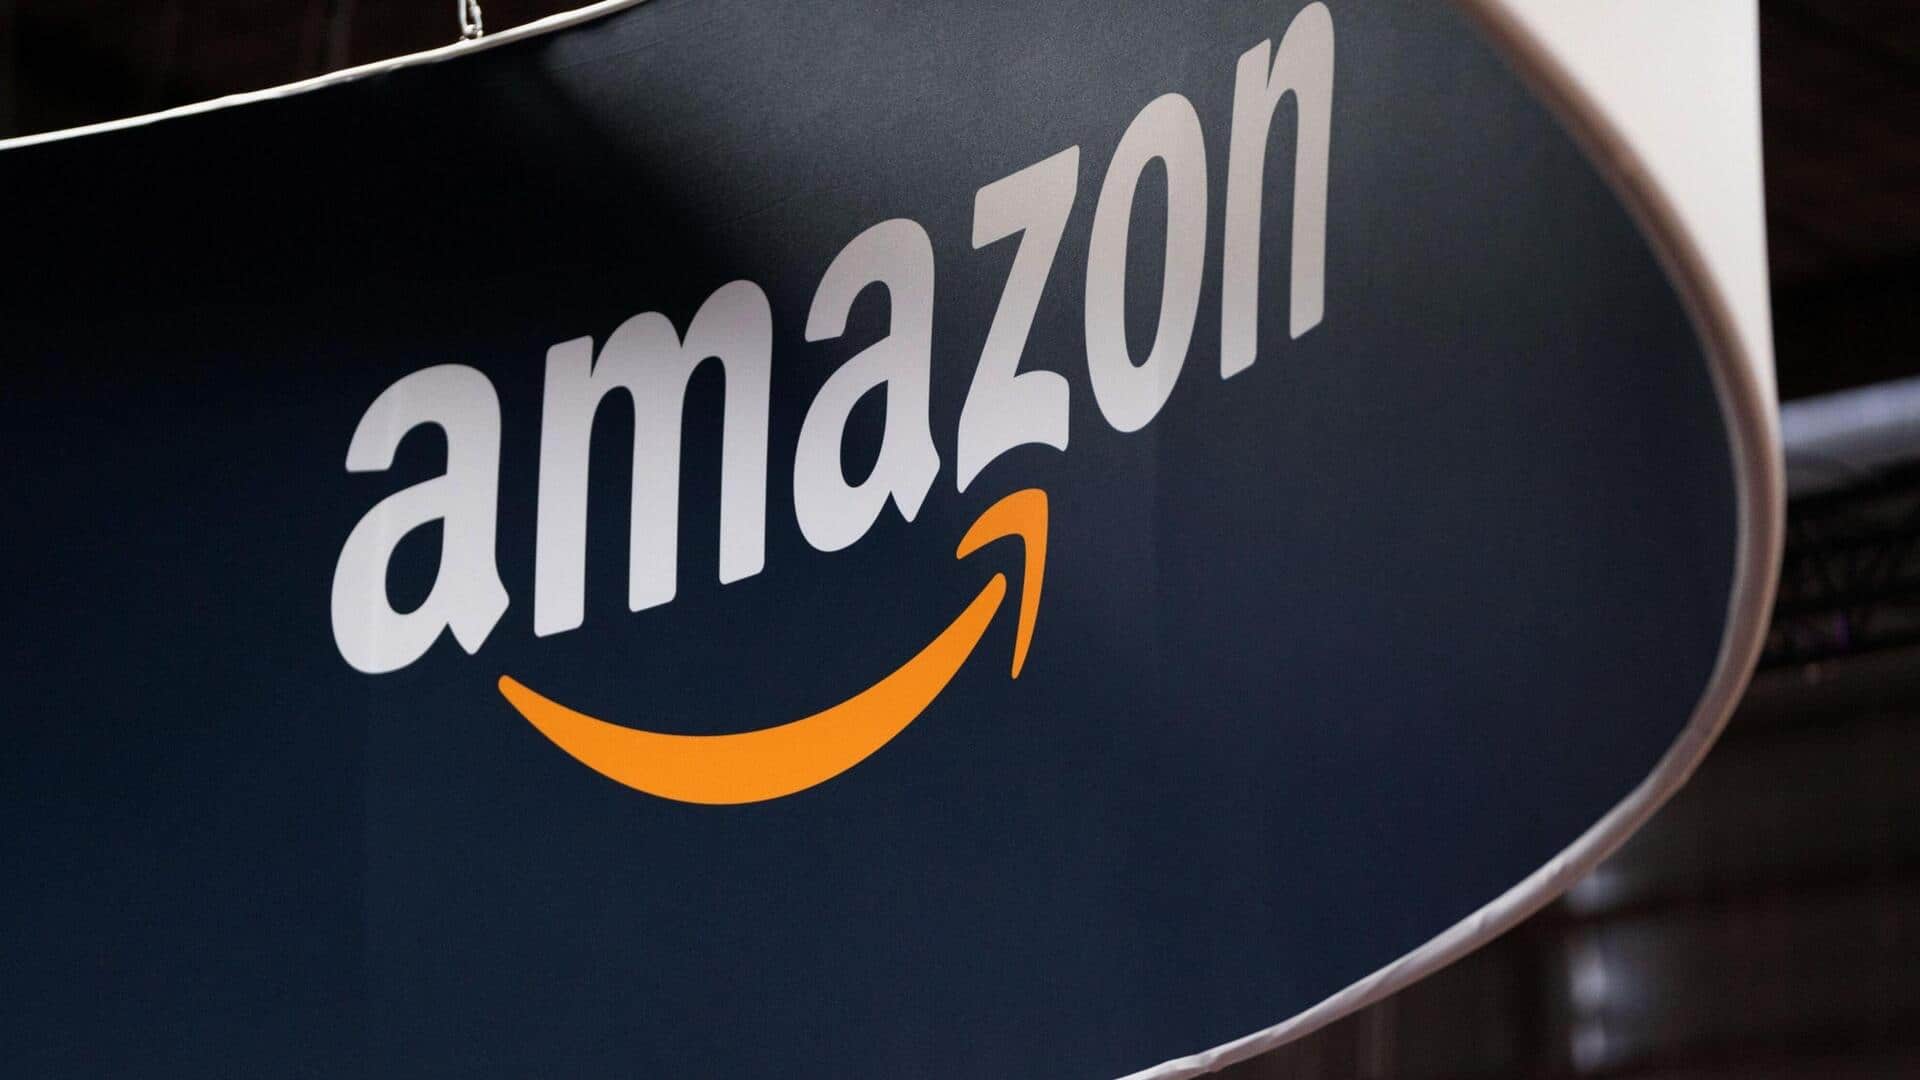 Amazon is targeting $20bn in exports from India by 2025